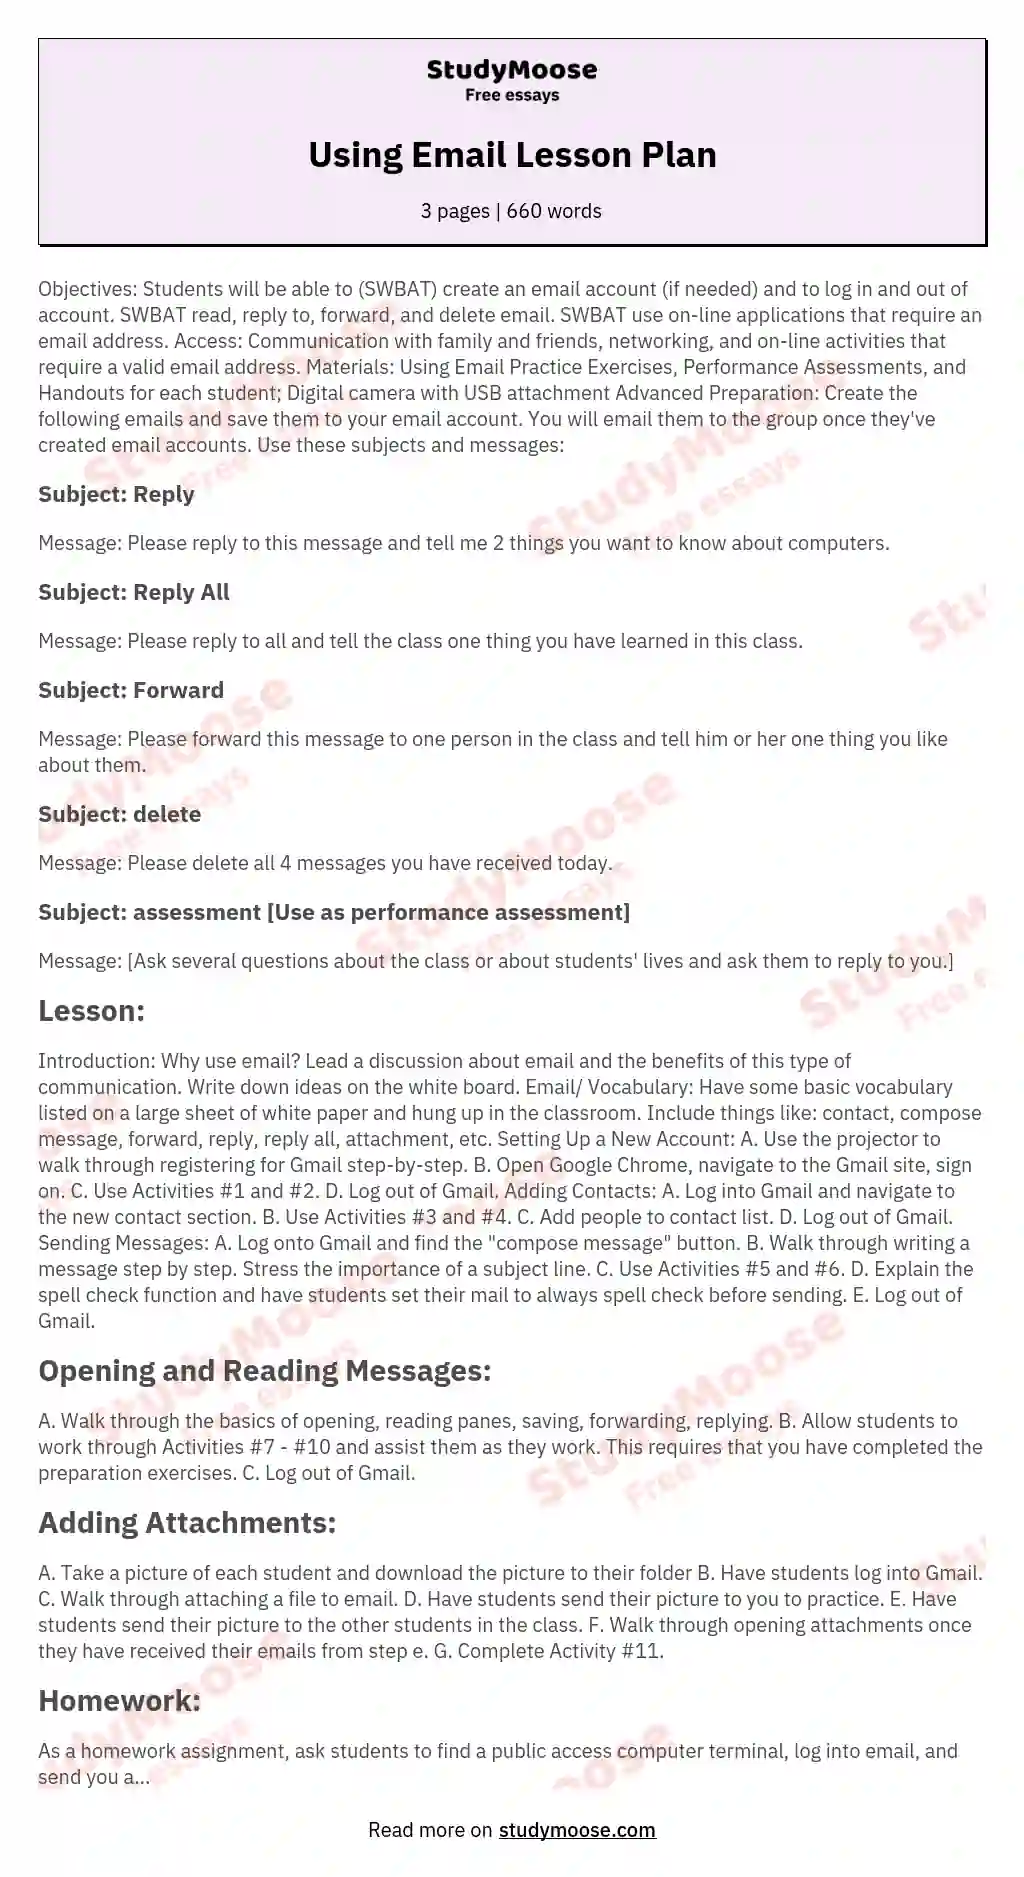 Using Email Lesson Plan essay